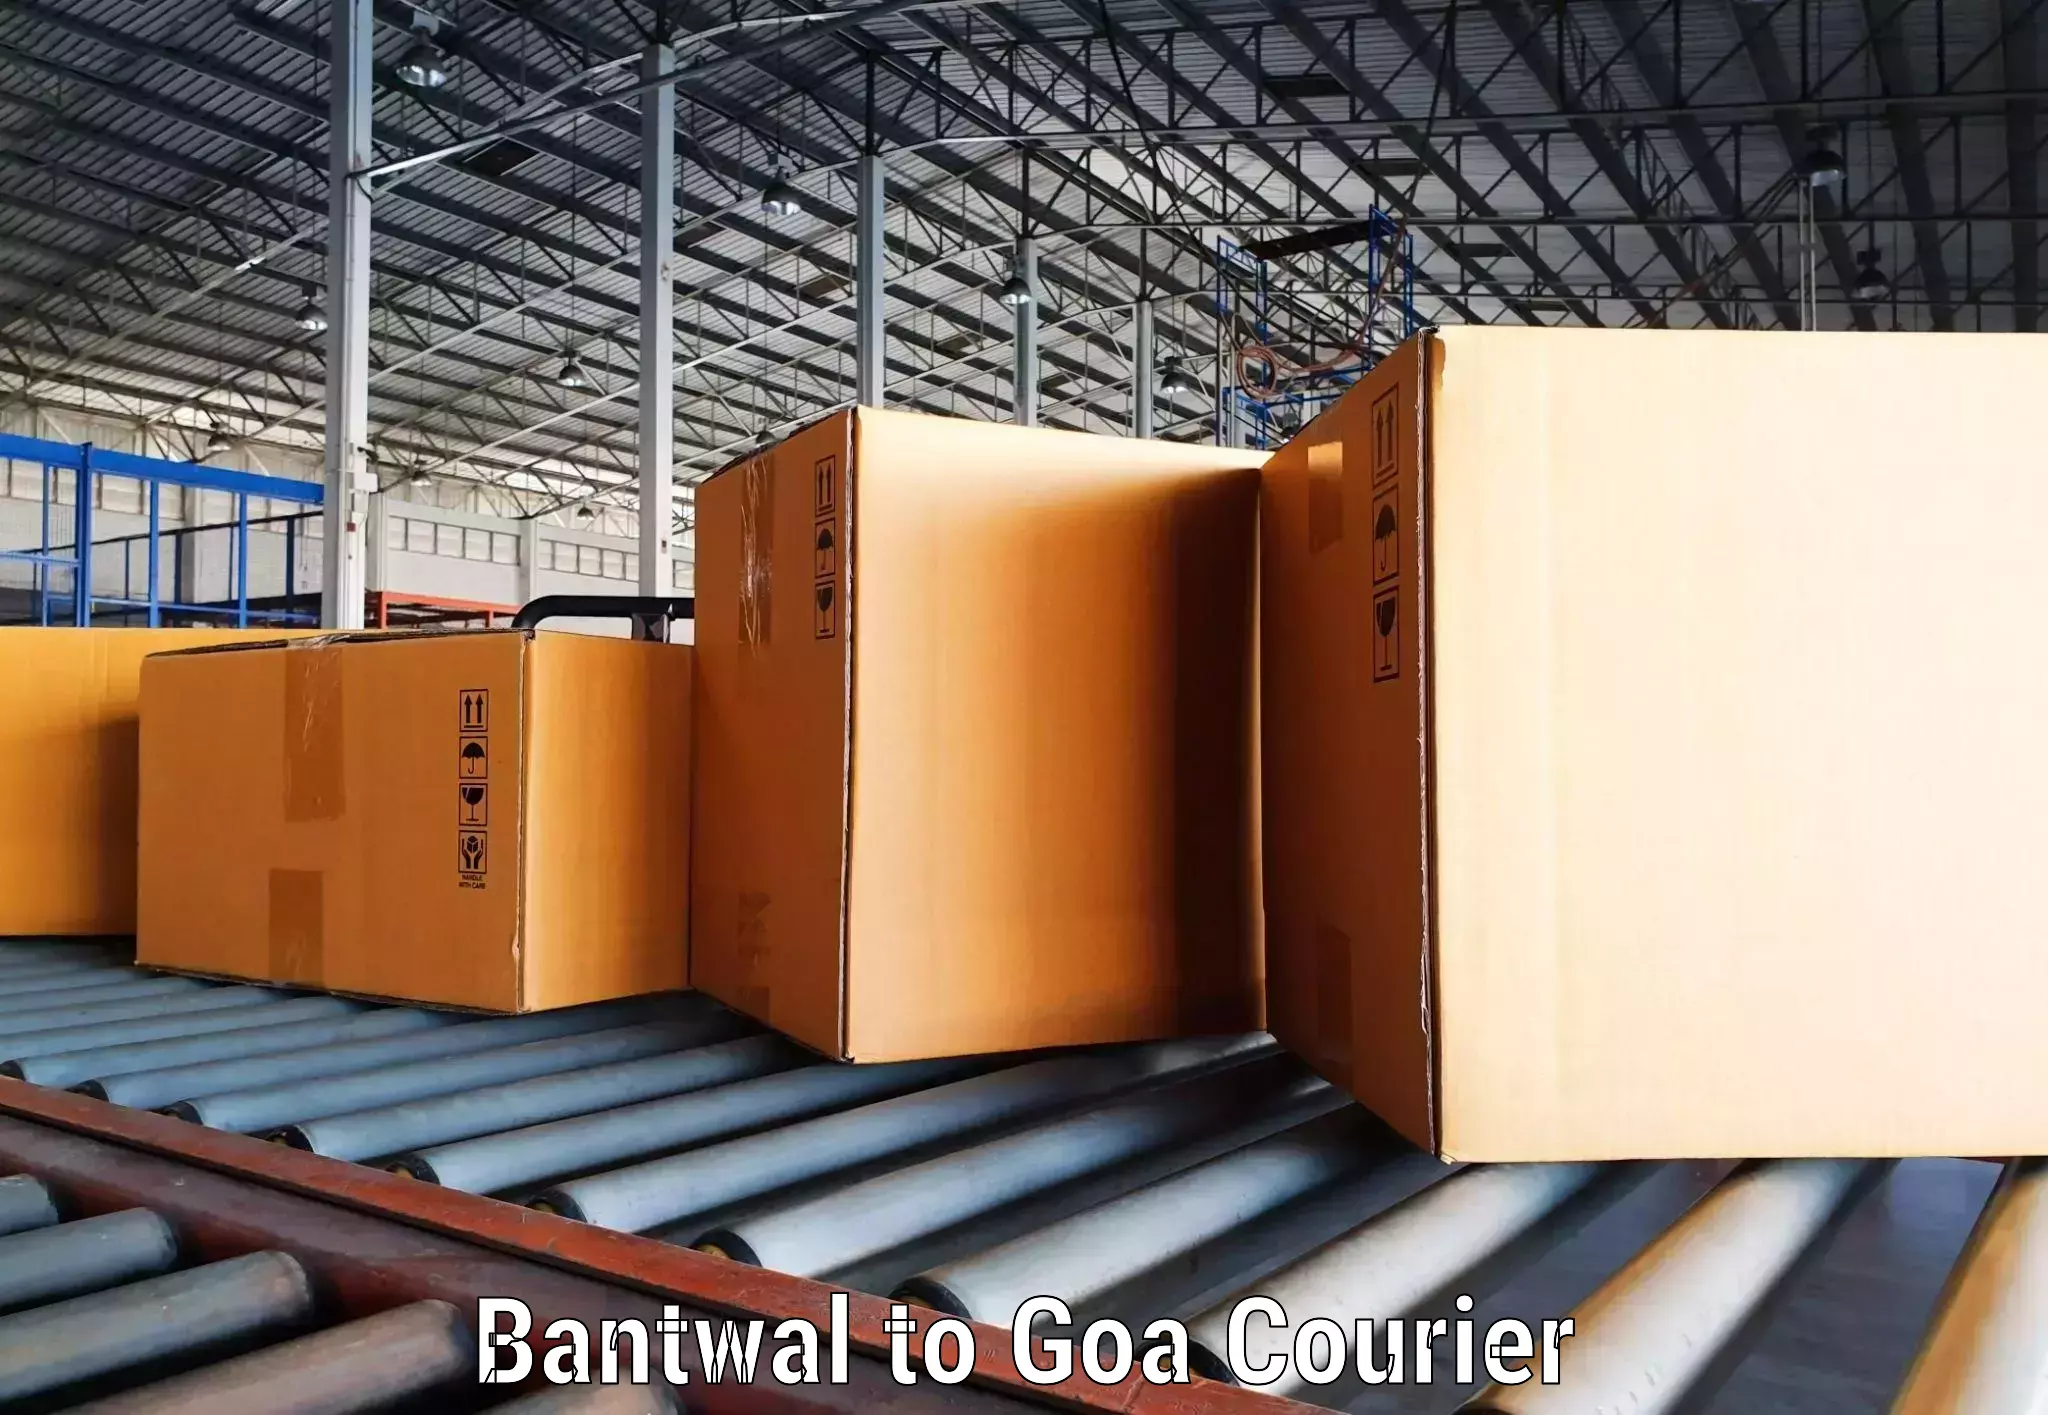 Courier service efficiency Bantwal to Goa University